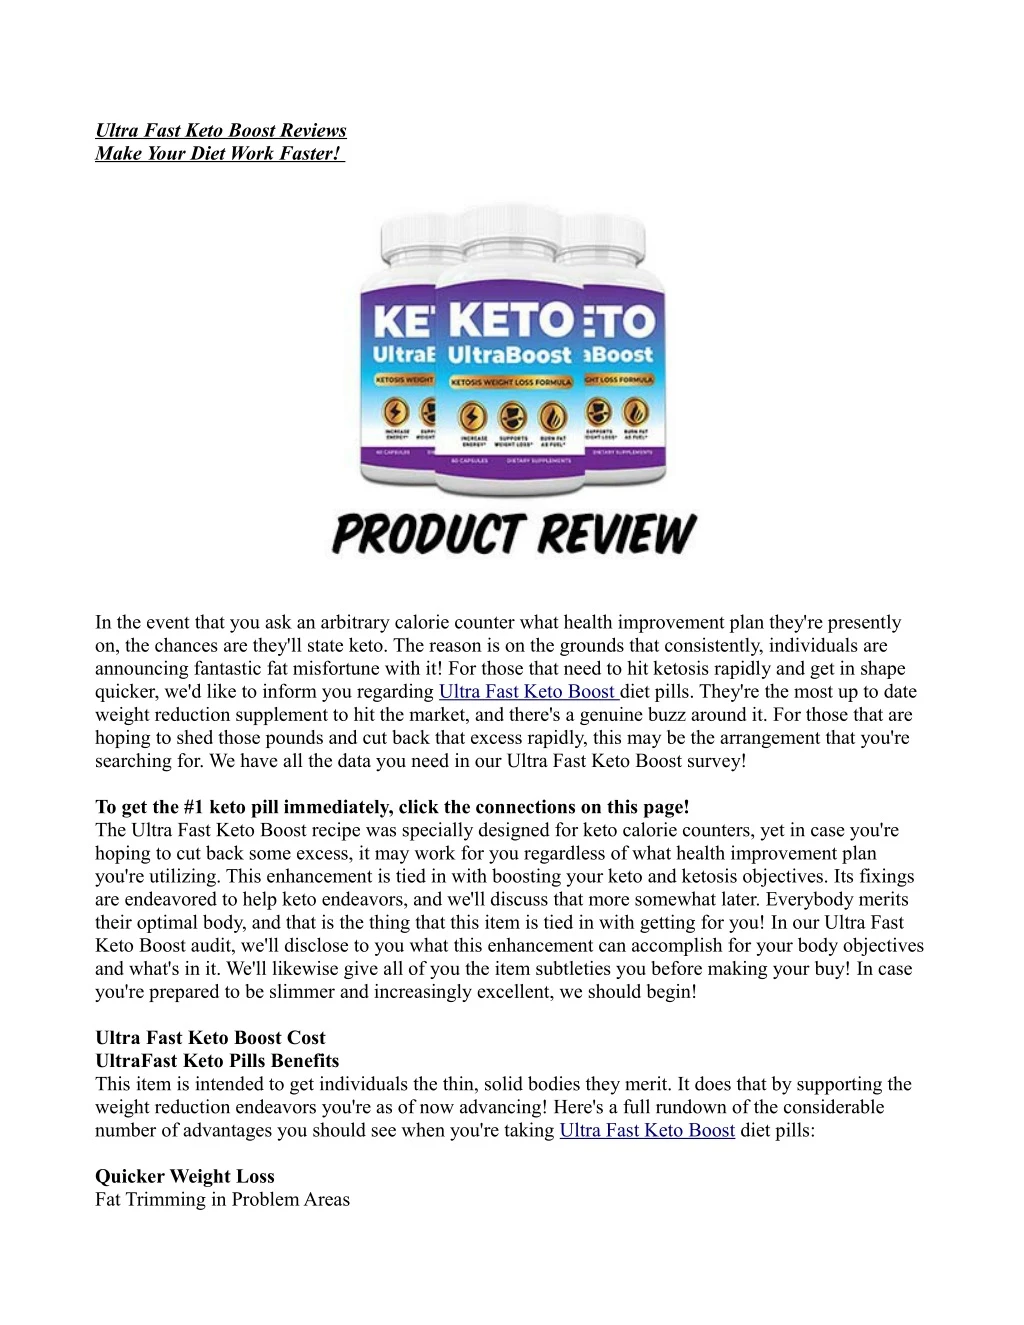 ultra fast keto boost reviews make your diet work